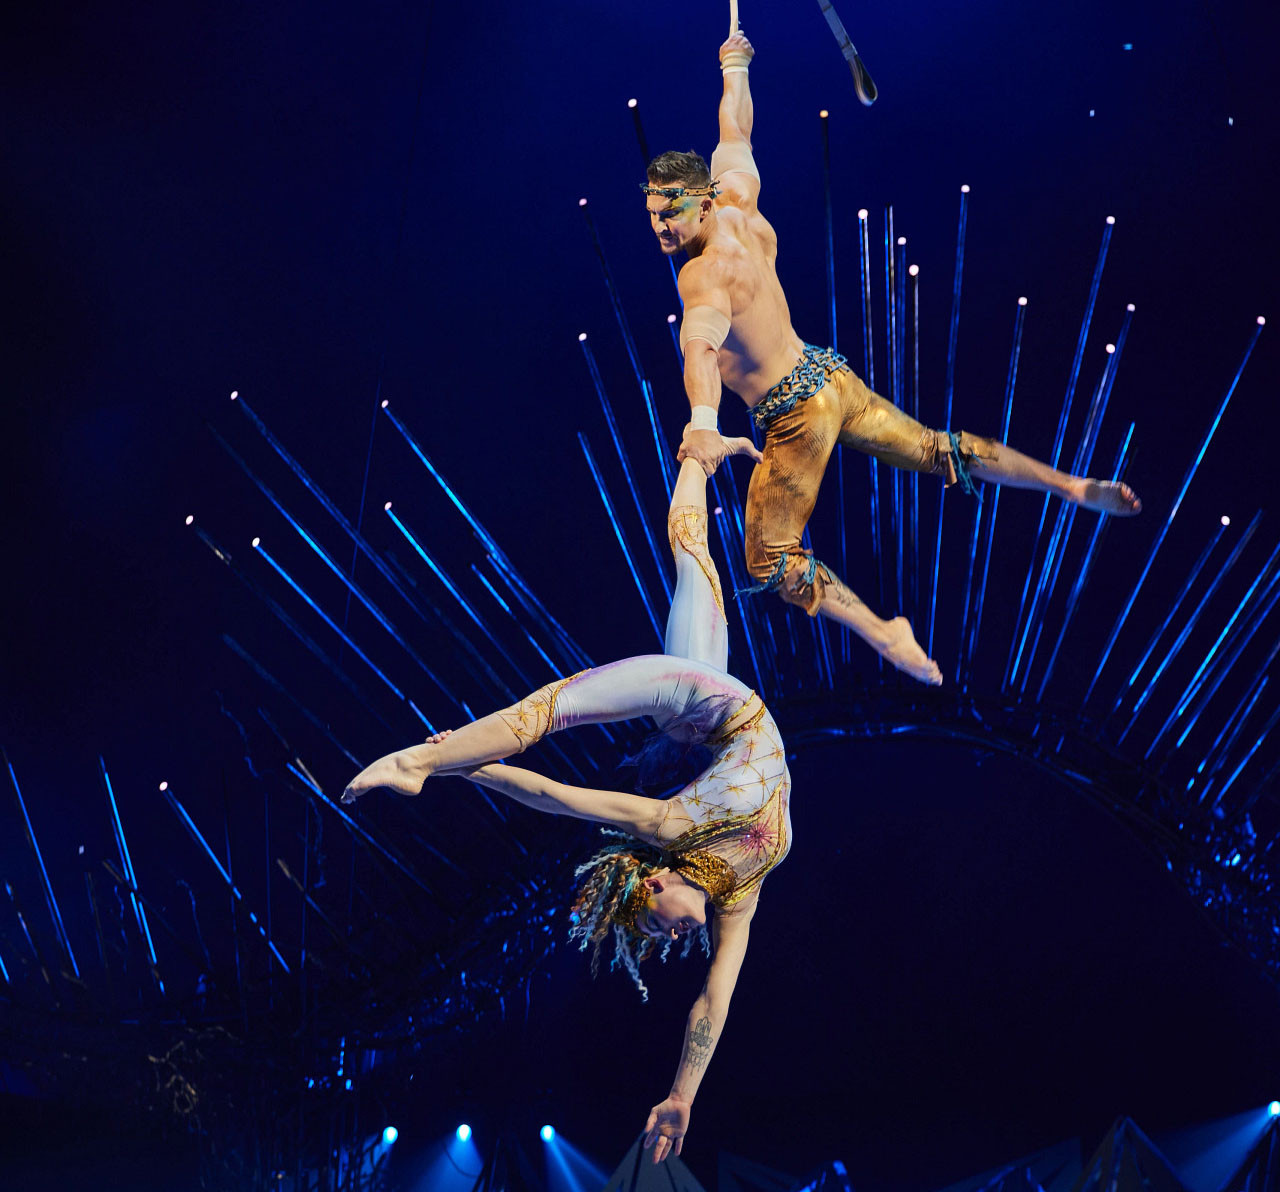 aerial artists from Cirque du Soleil, an annual Seattle event